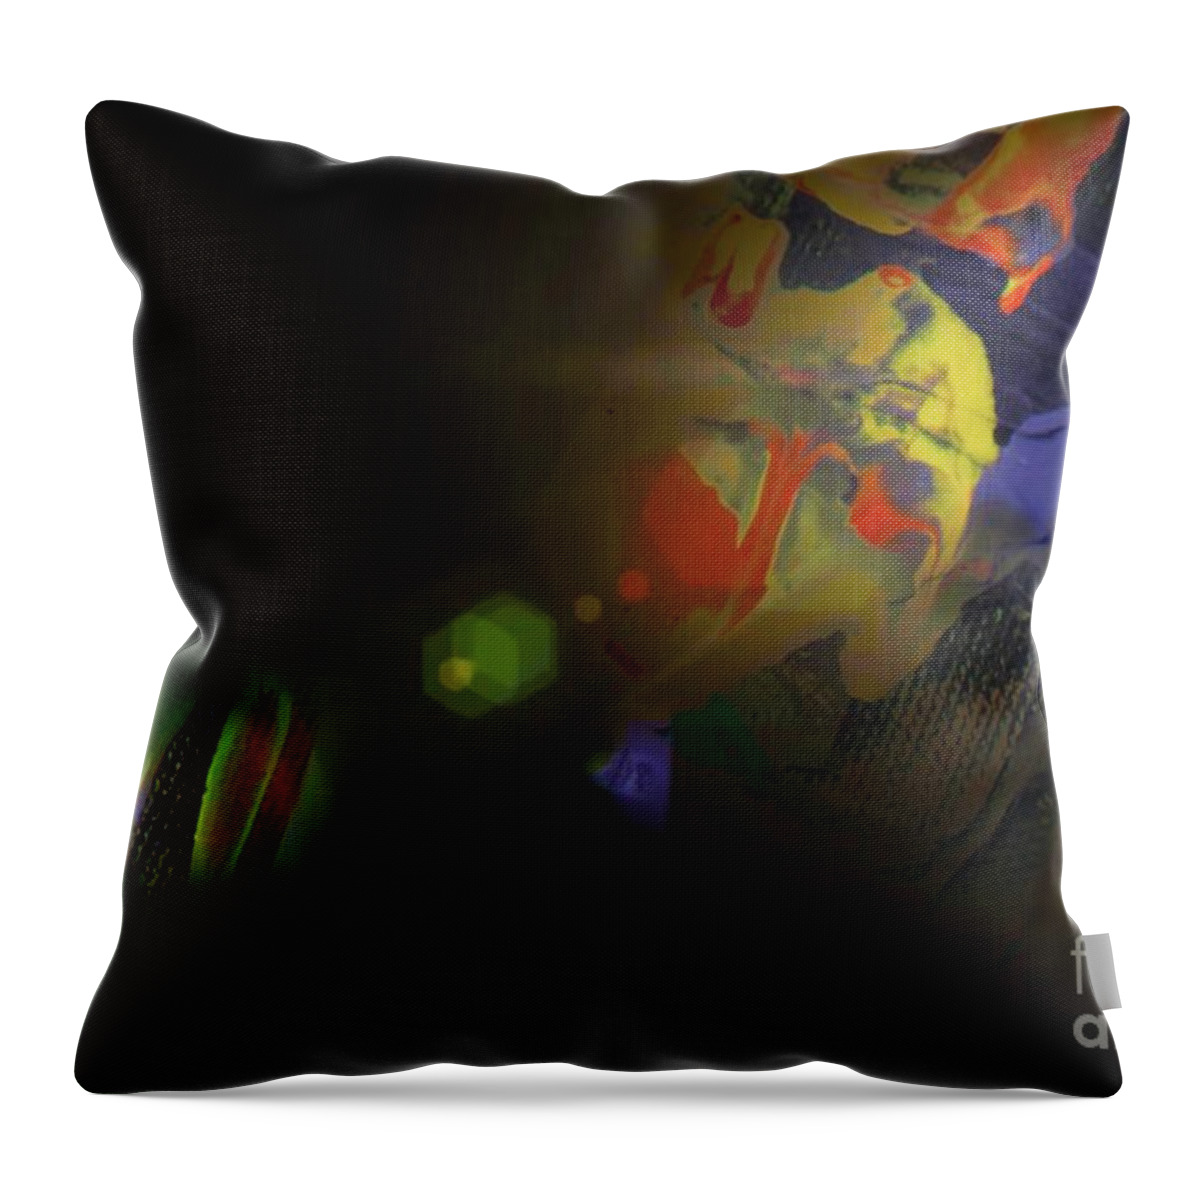 Paint Throw Pillow featuring the digital art Compassion Of Light by Yvonne Padmos